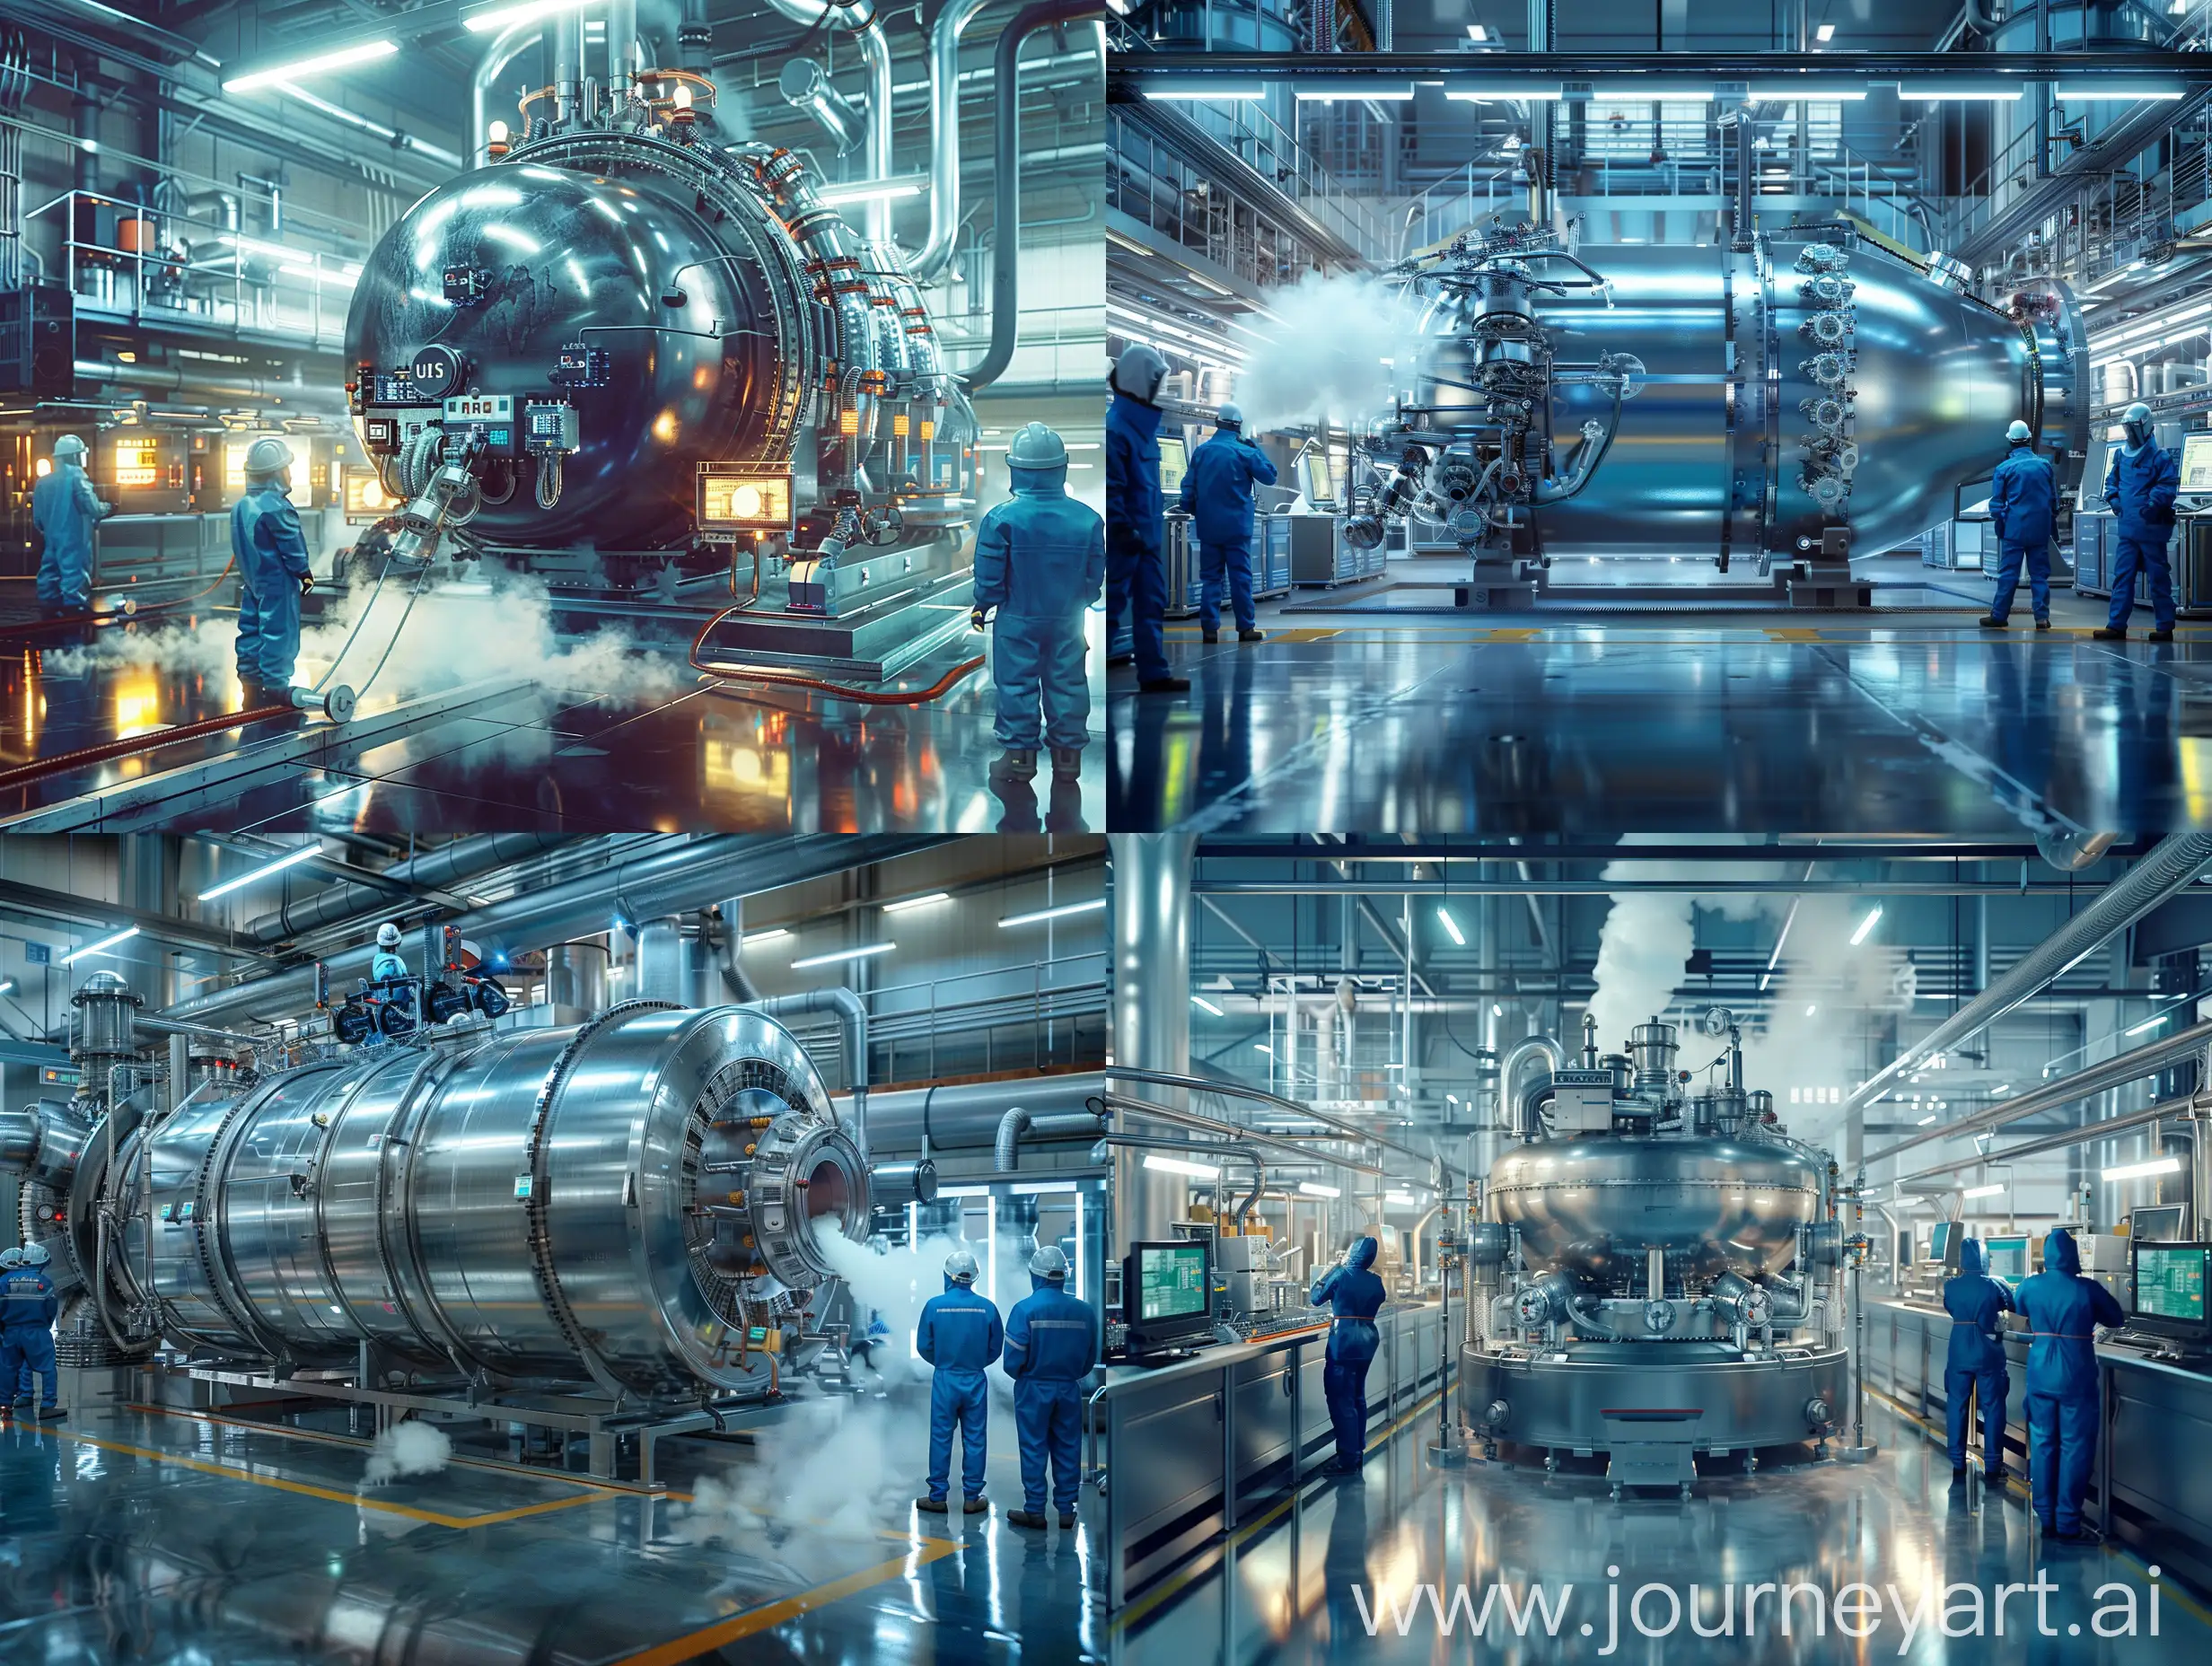 HighTech-Industrial-Production-Line-with-Workers-in-Protective-Gear-and-Glowing-Monitors